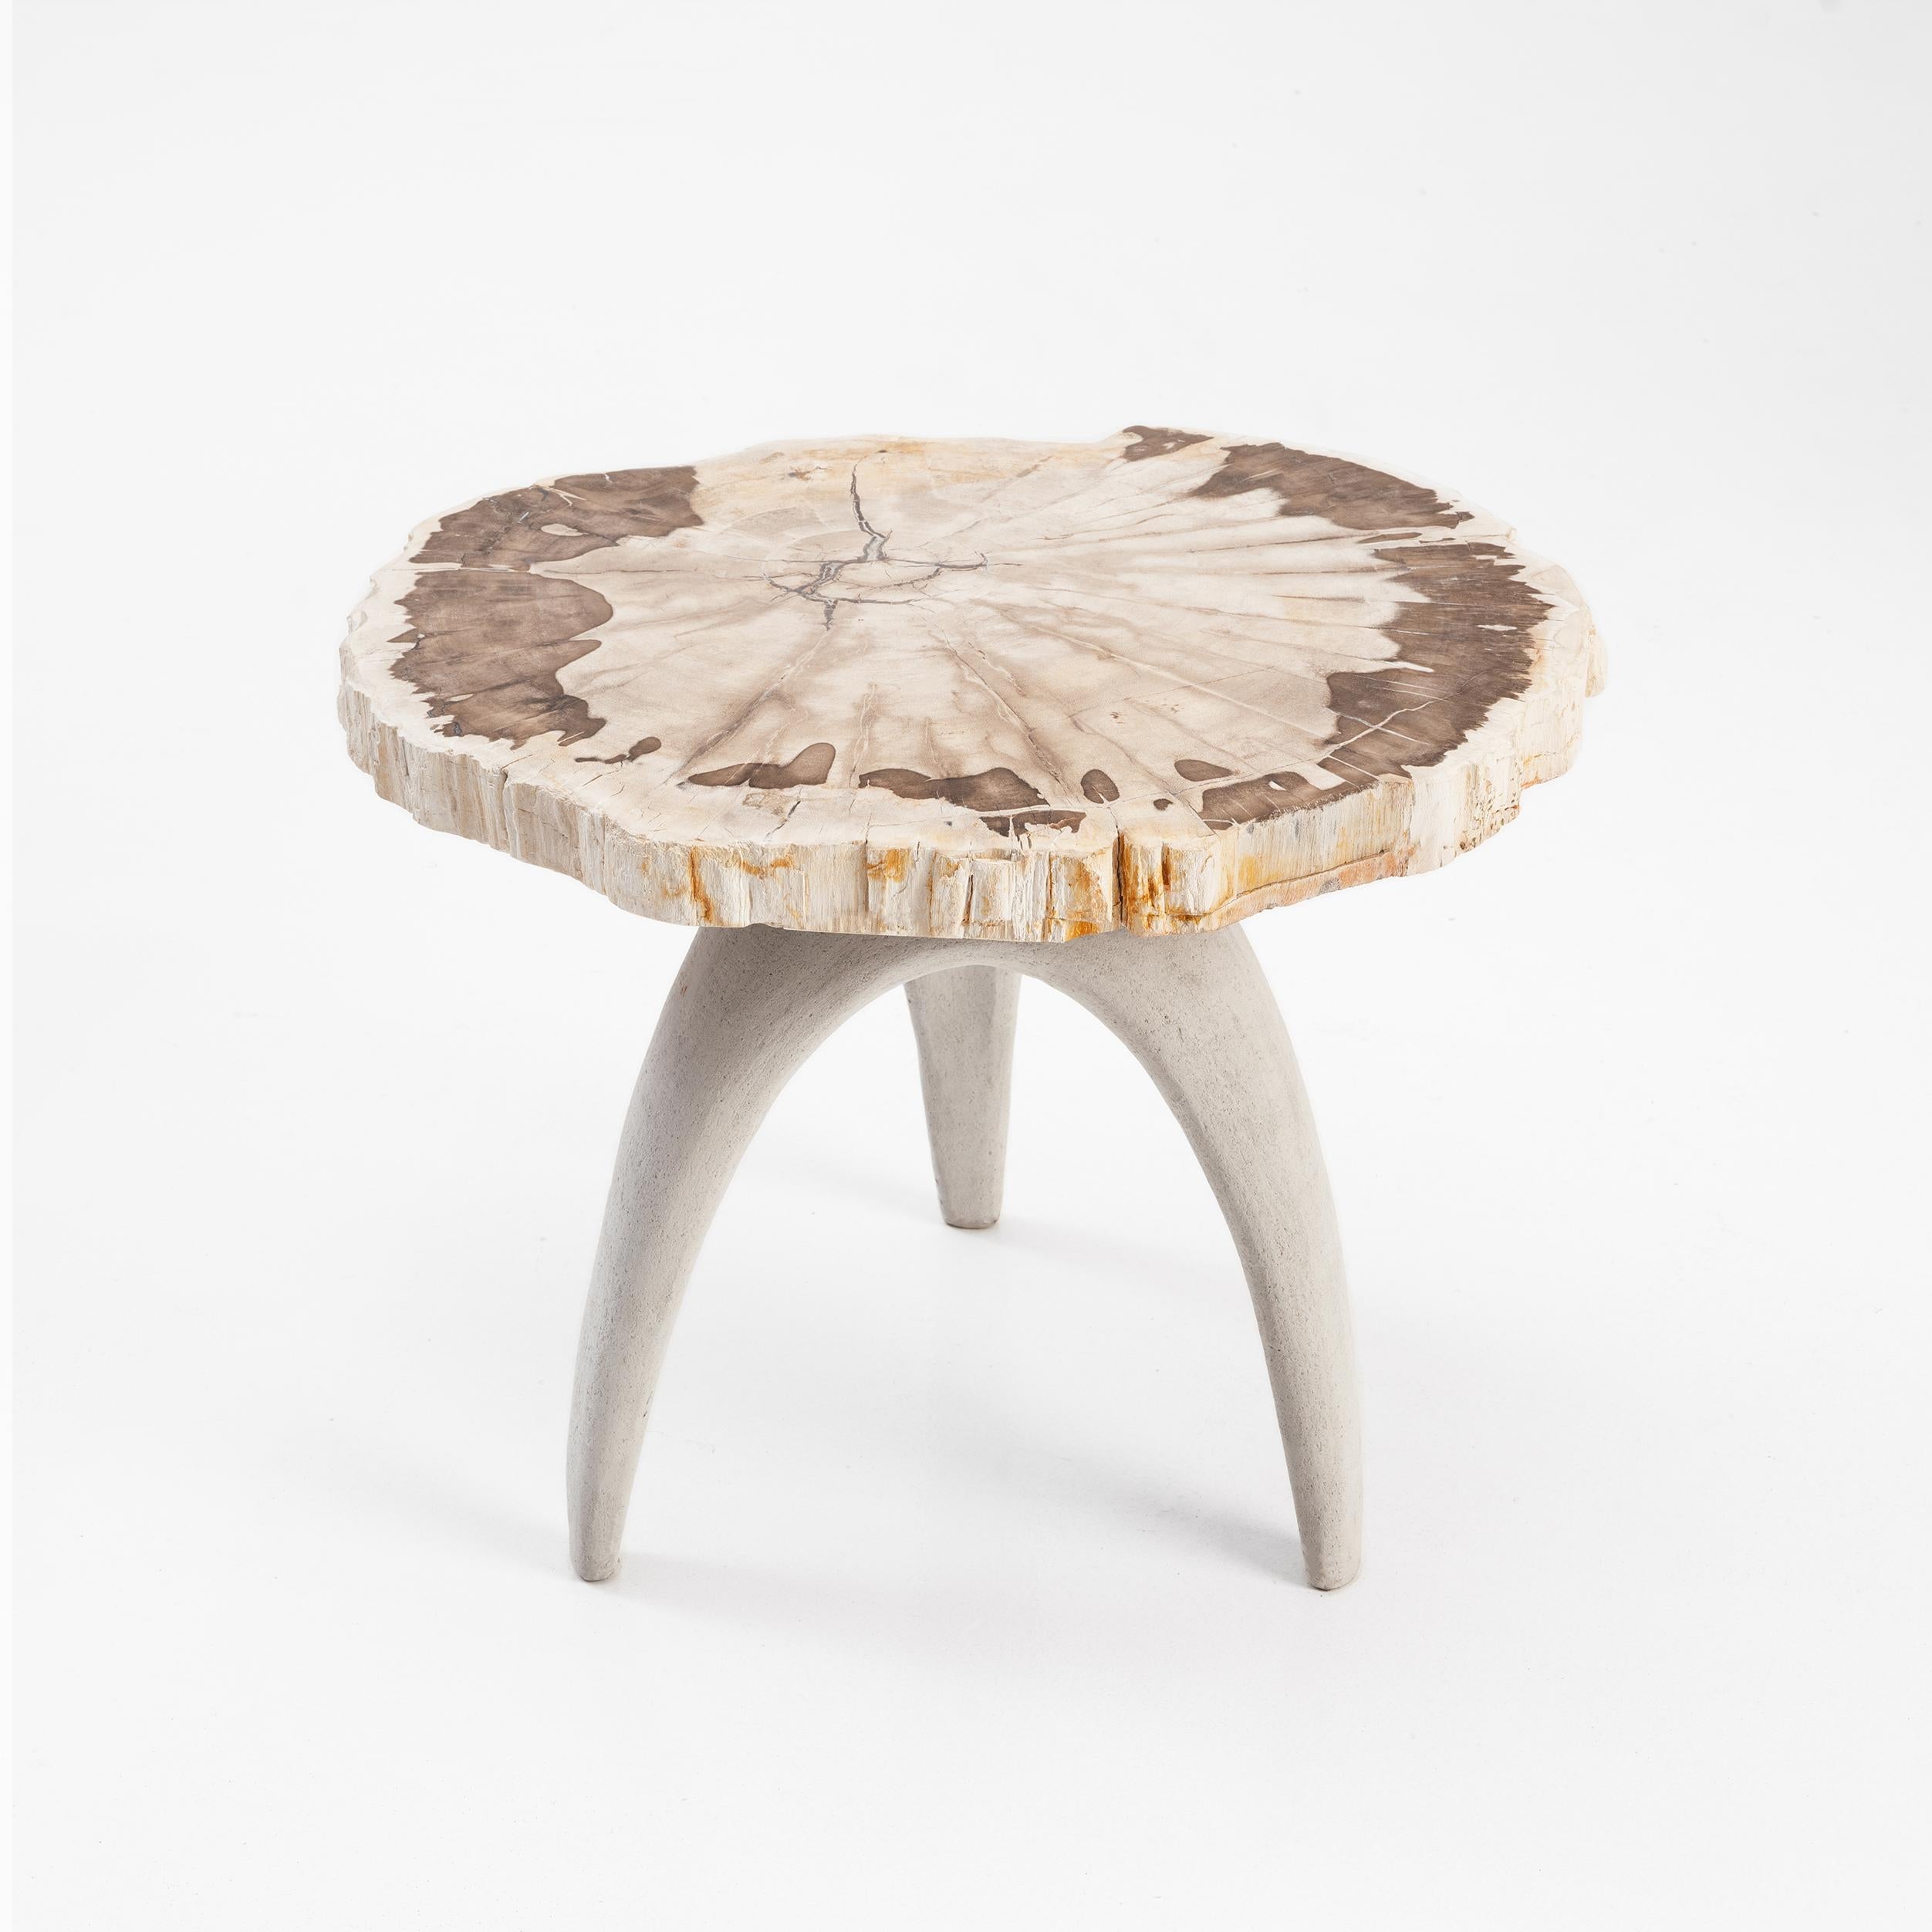 Bermuda Triangle Table by Odditi
Dimensions: W 56 x D 46 x H 45 cm
Materials: Petrified Wood, Limestone Composite (Light Colour), Lava Stone Composite (Dark Colour), Steel

The ‘Bermuda Triangle’ sculptural table features a solid petrified wood top,